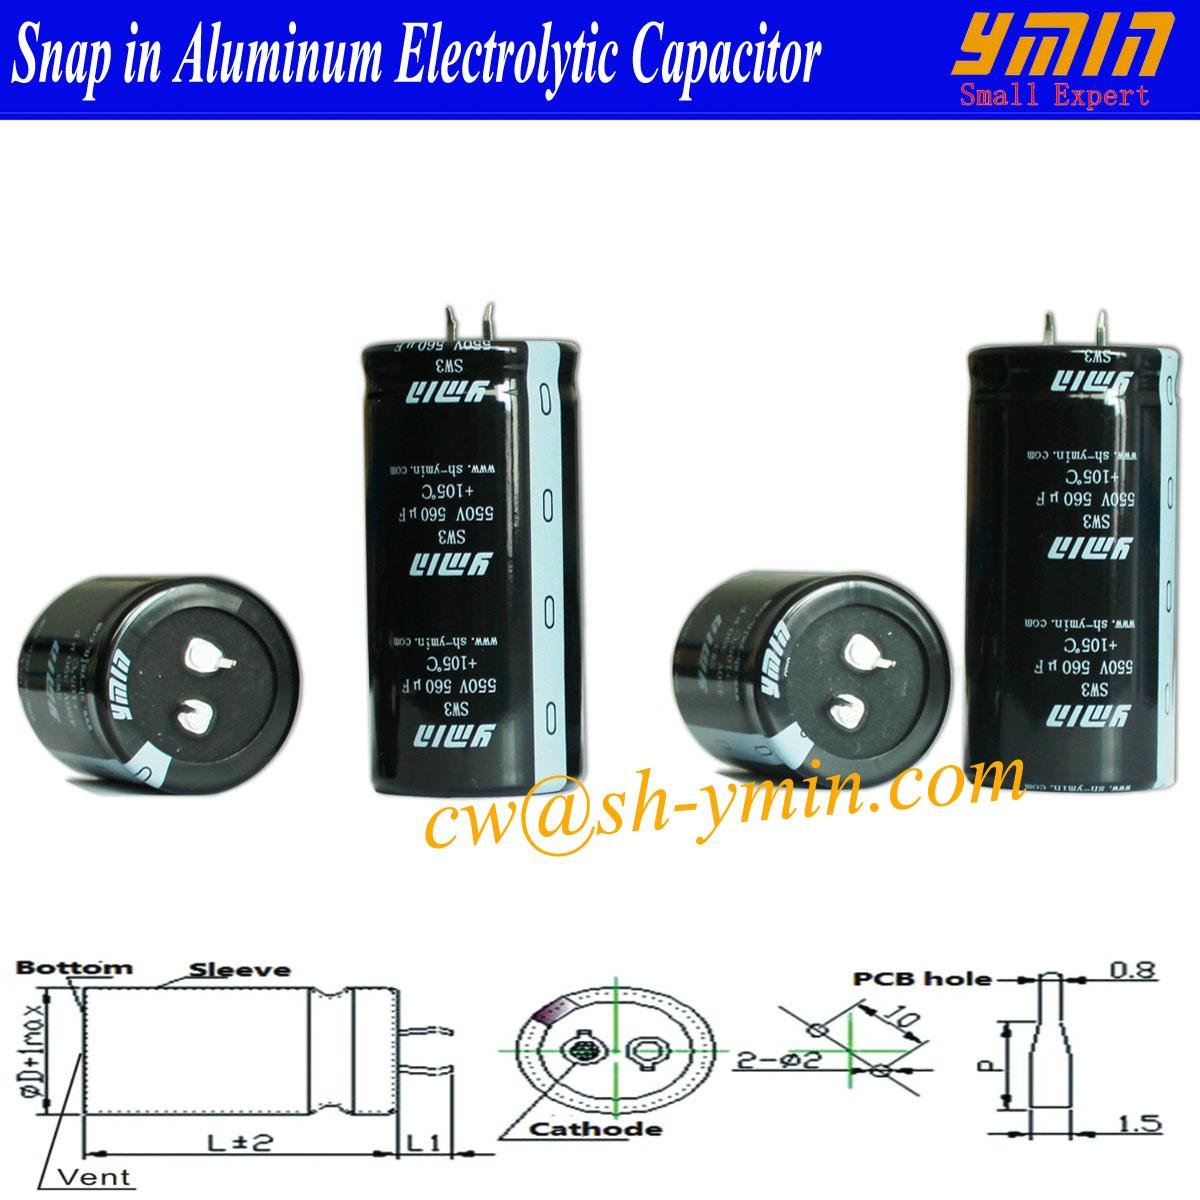 Power Capacitor Snap in Aluminum Electrolytic Capacitor for Power Inverter